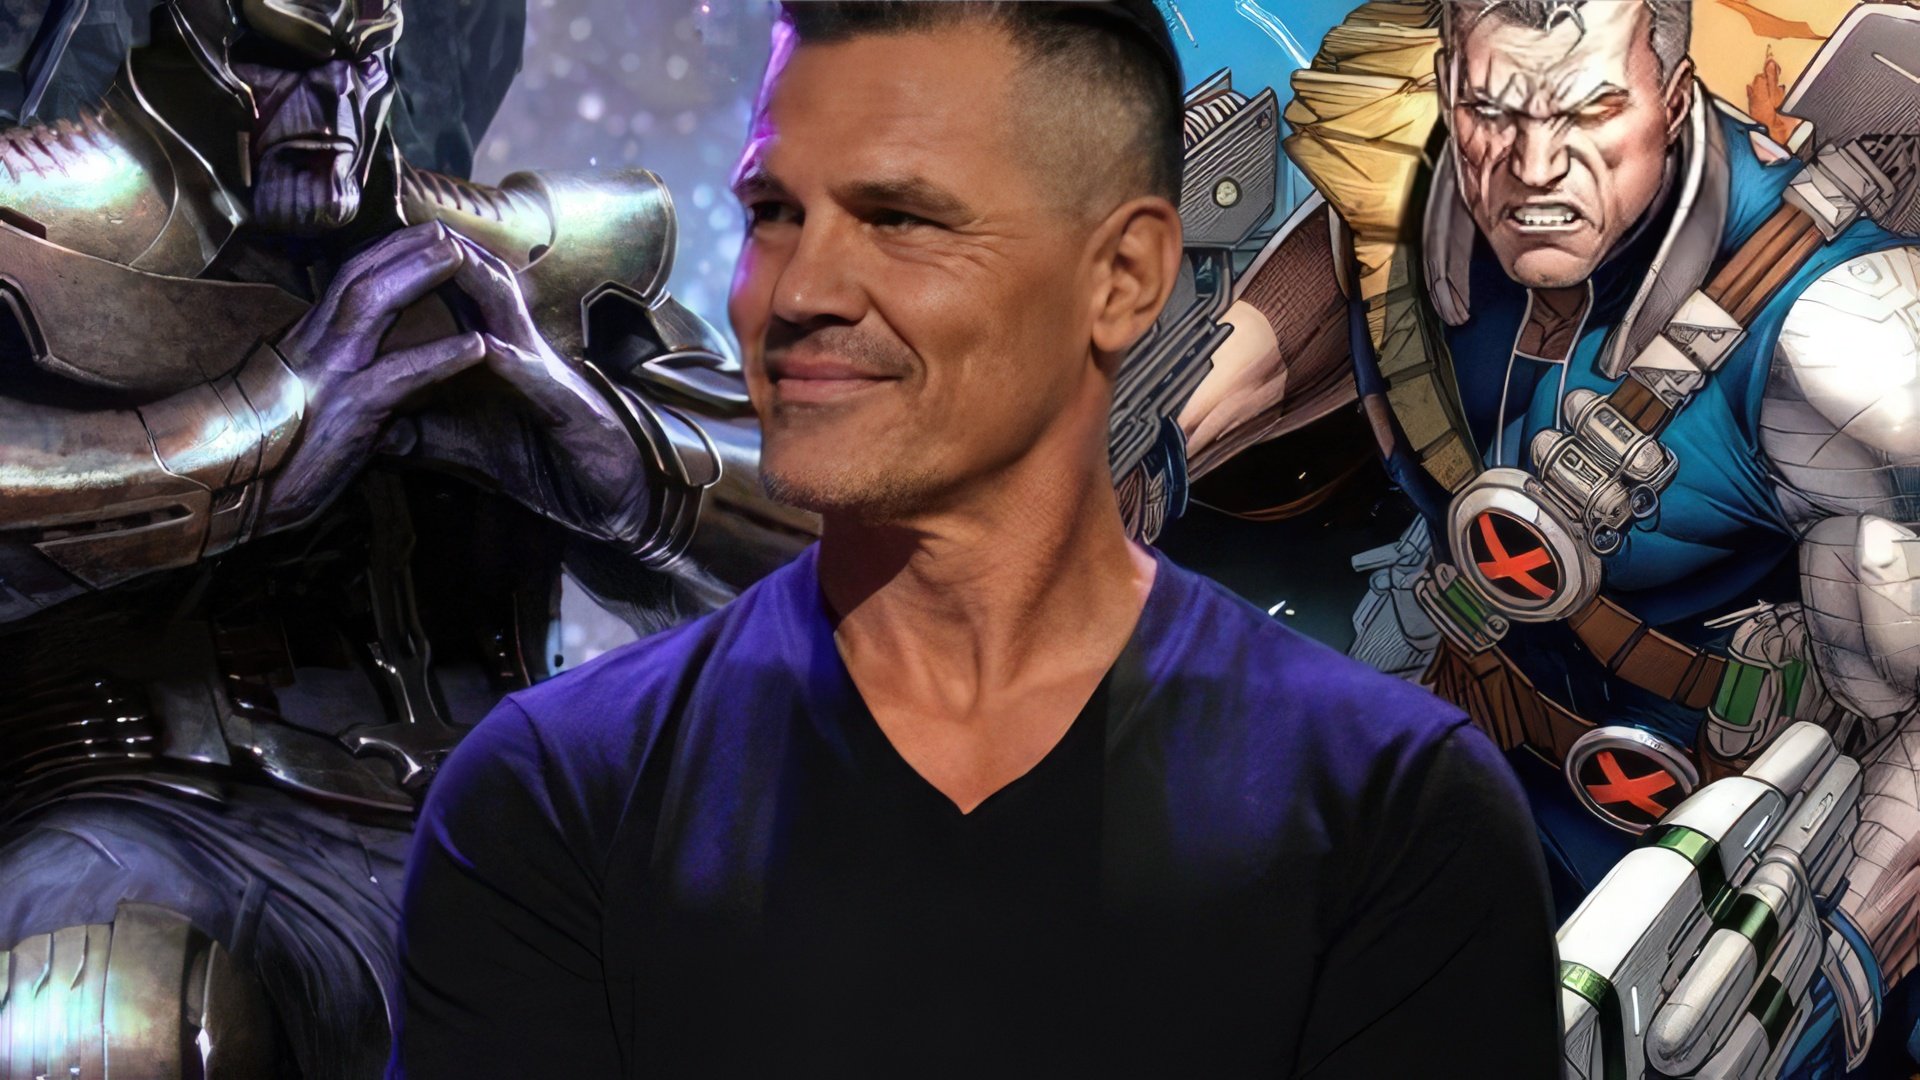 Josh Brolin in the role of Thanos in the movie The Avengers